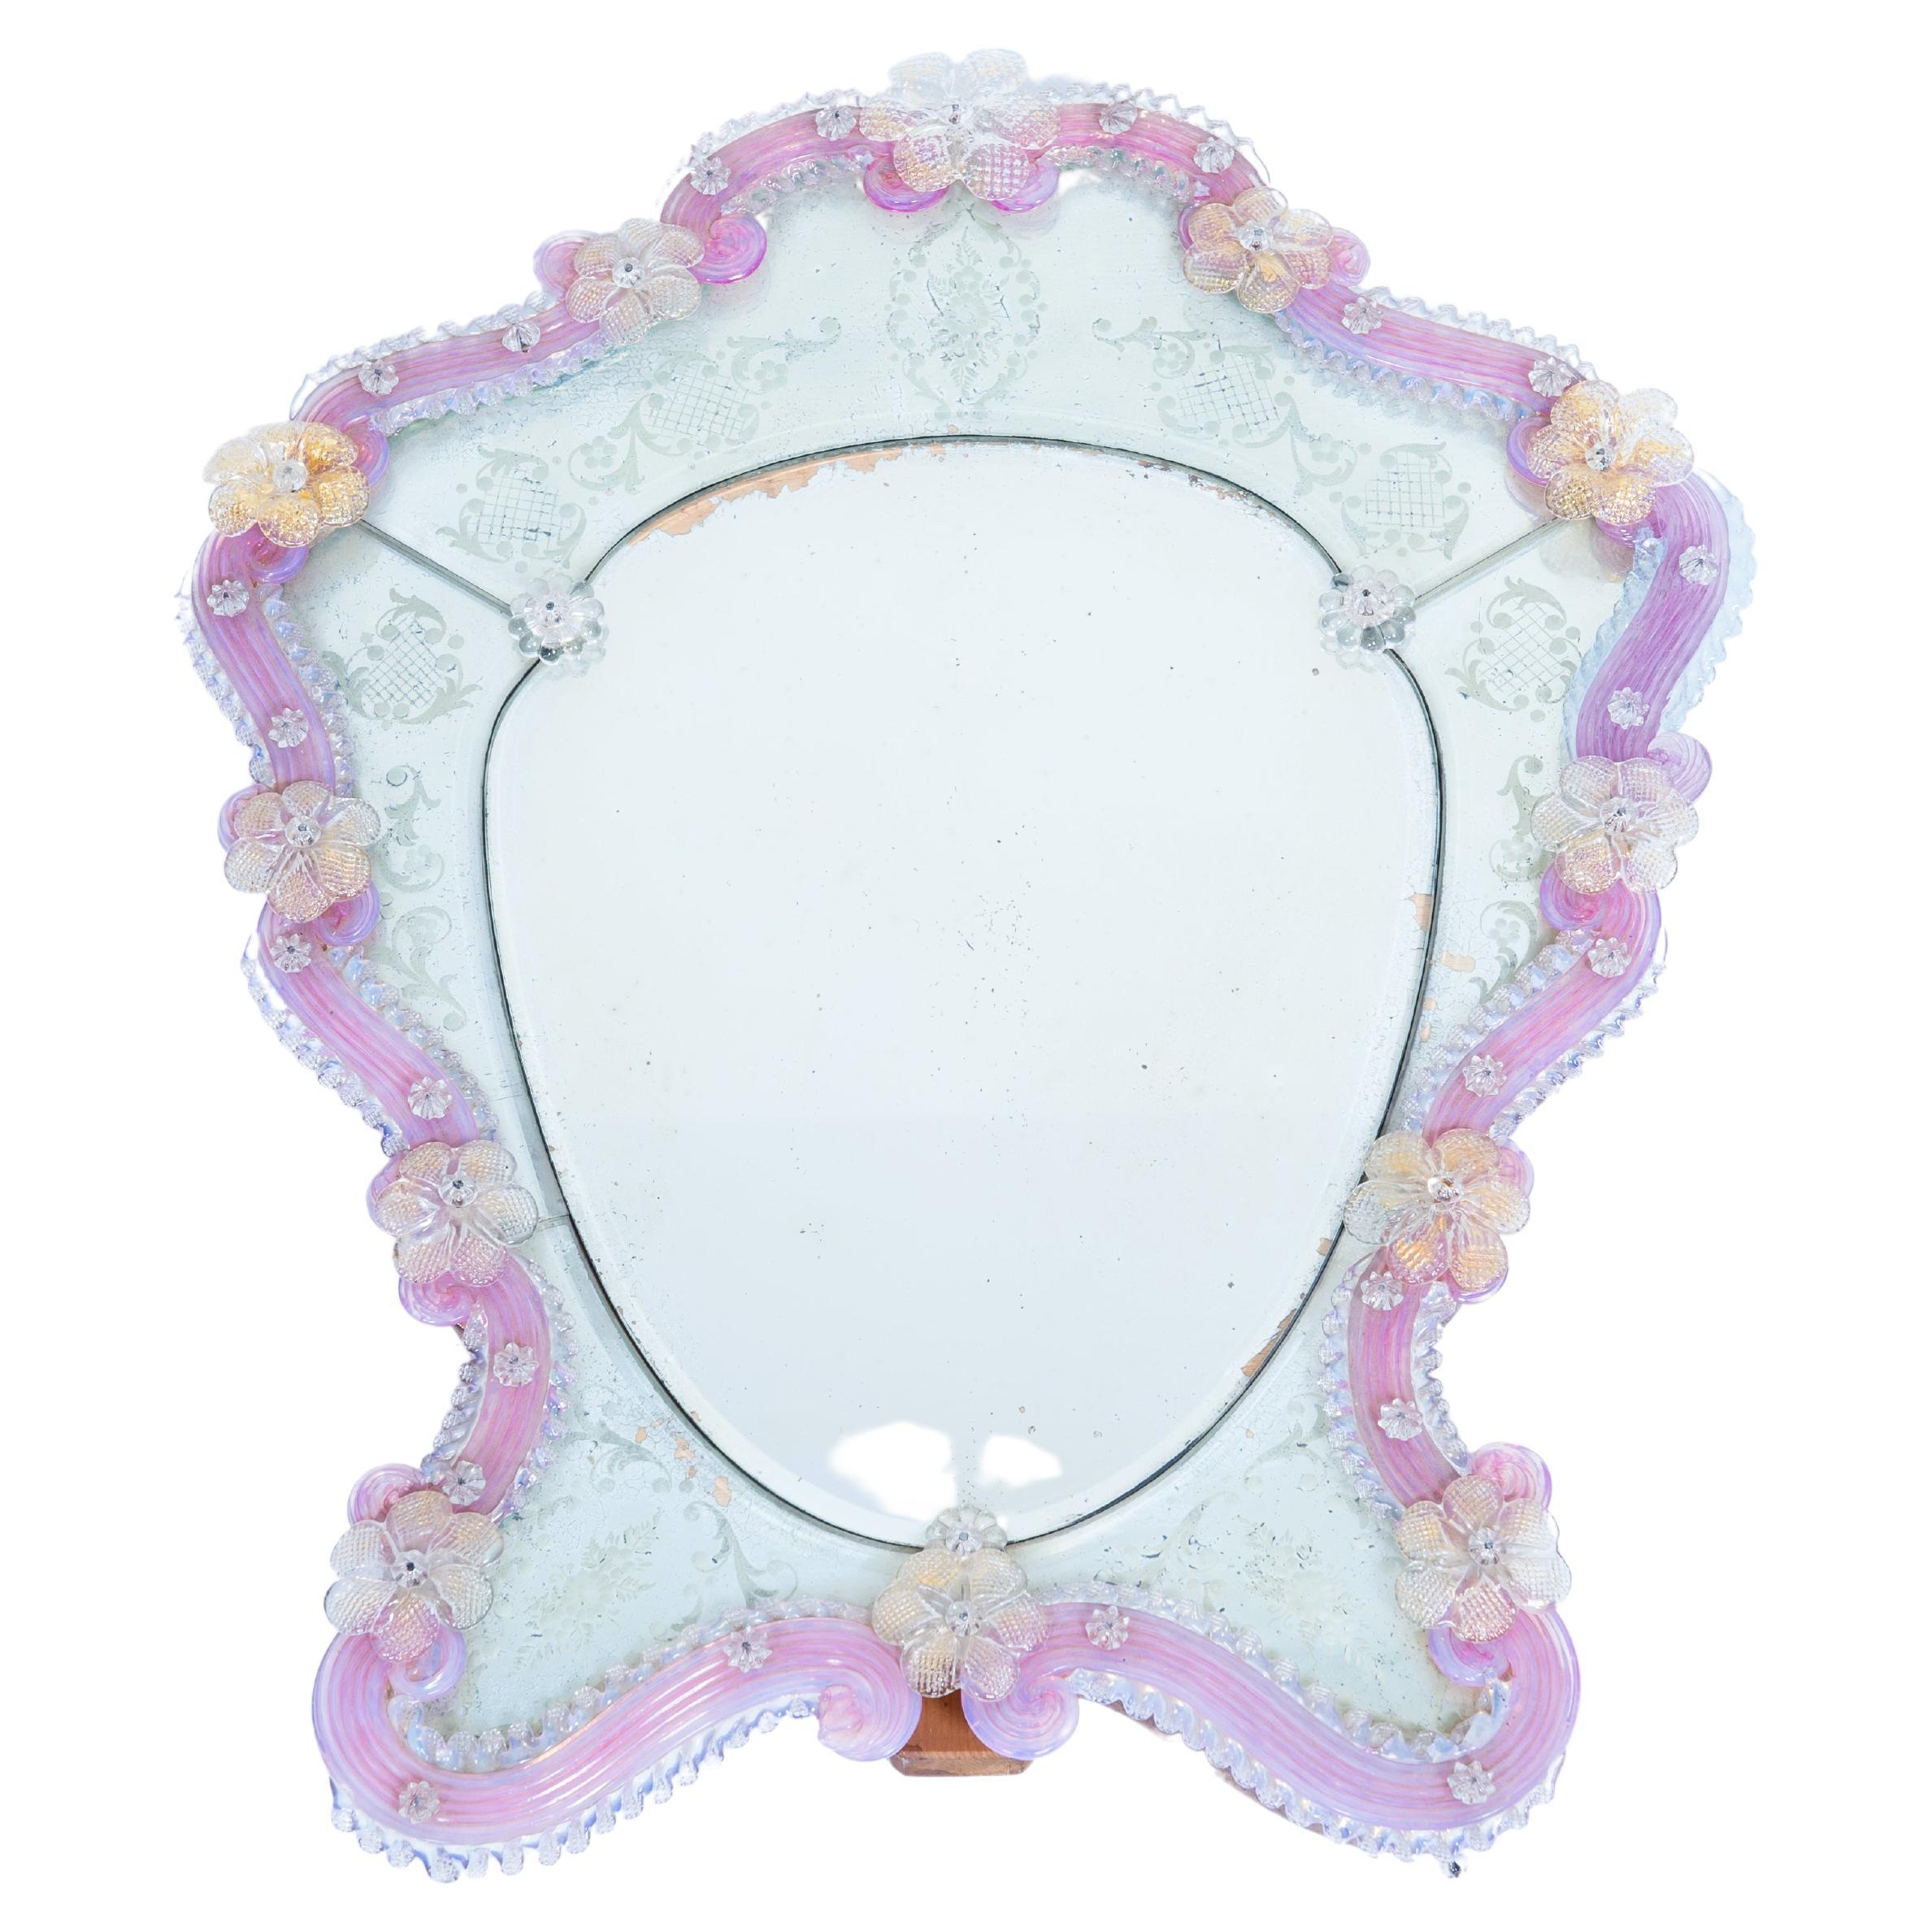 Murano Glass Table Mirror with Engravings and Pink Floral Decoration 1950s Italy For Sale